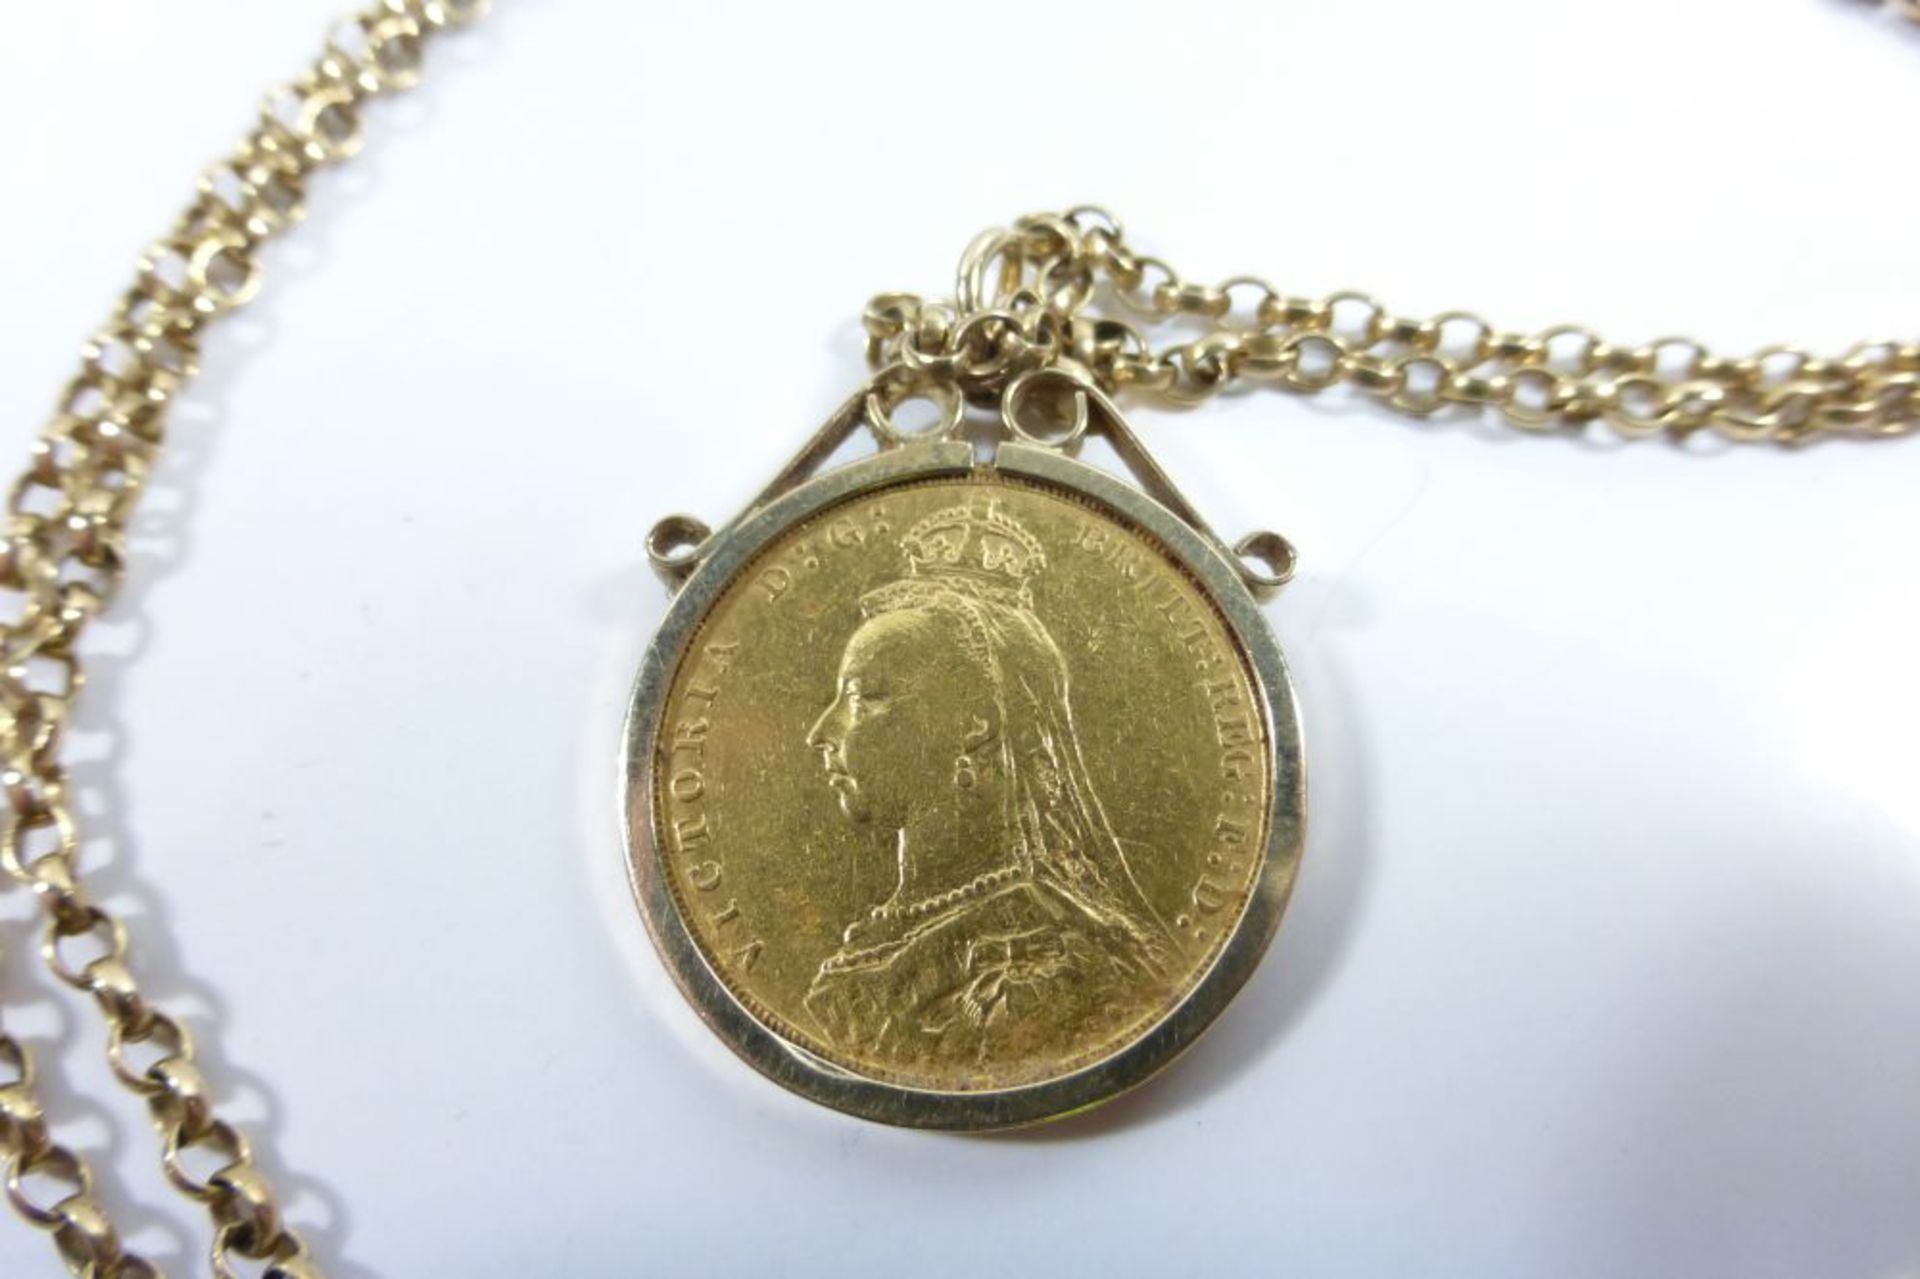 An 1889 Gold Sovereign Victoria Jubilee Head Coin Mounted in a 9ct Gold Necklace and Coin Retainer - Image 3 of 4